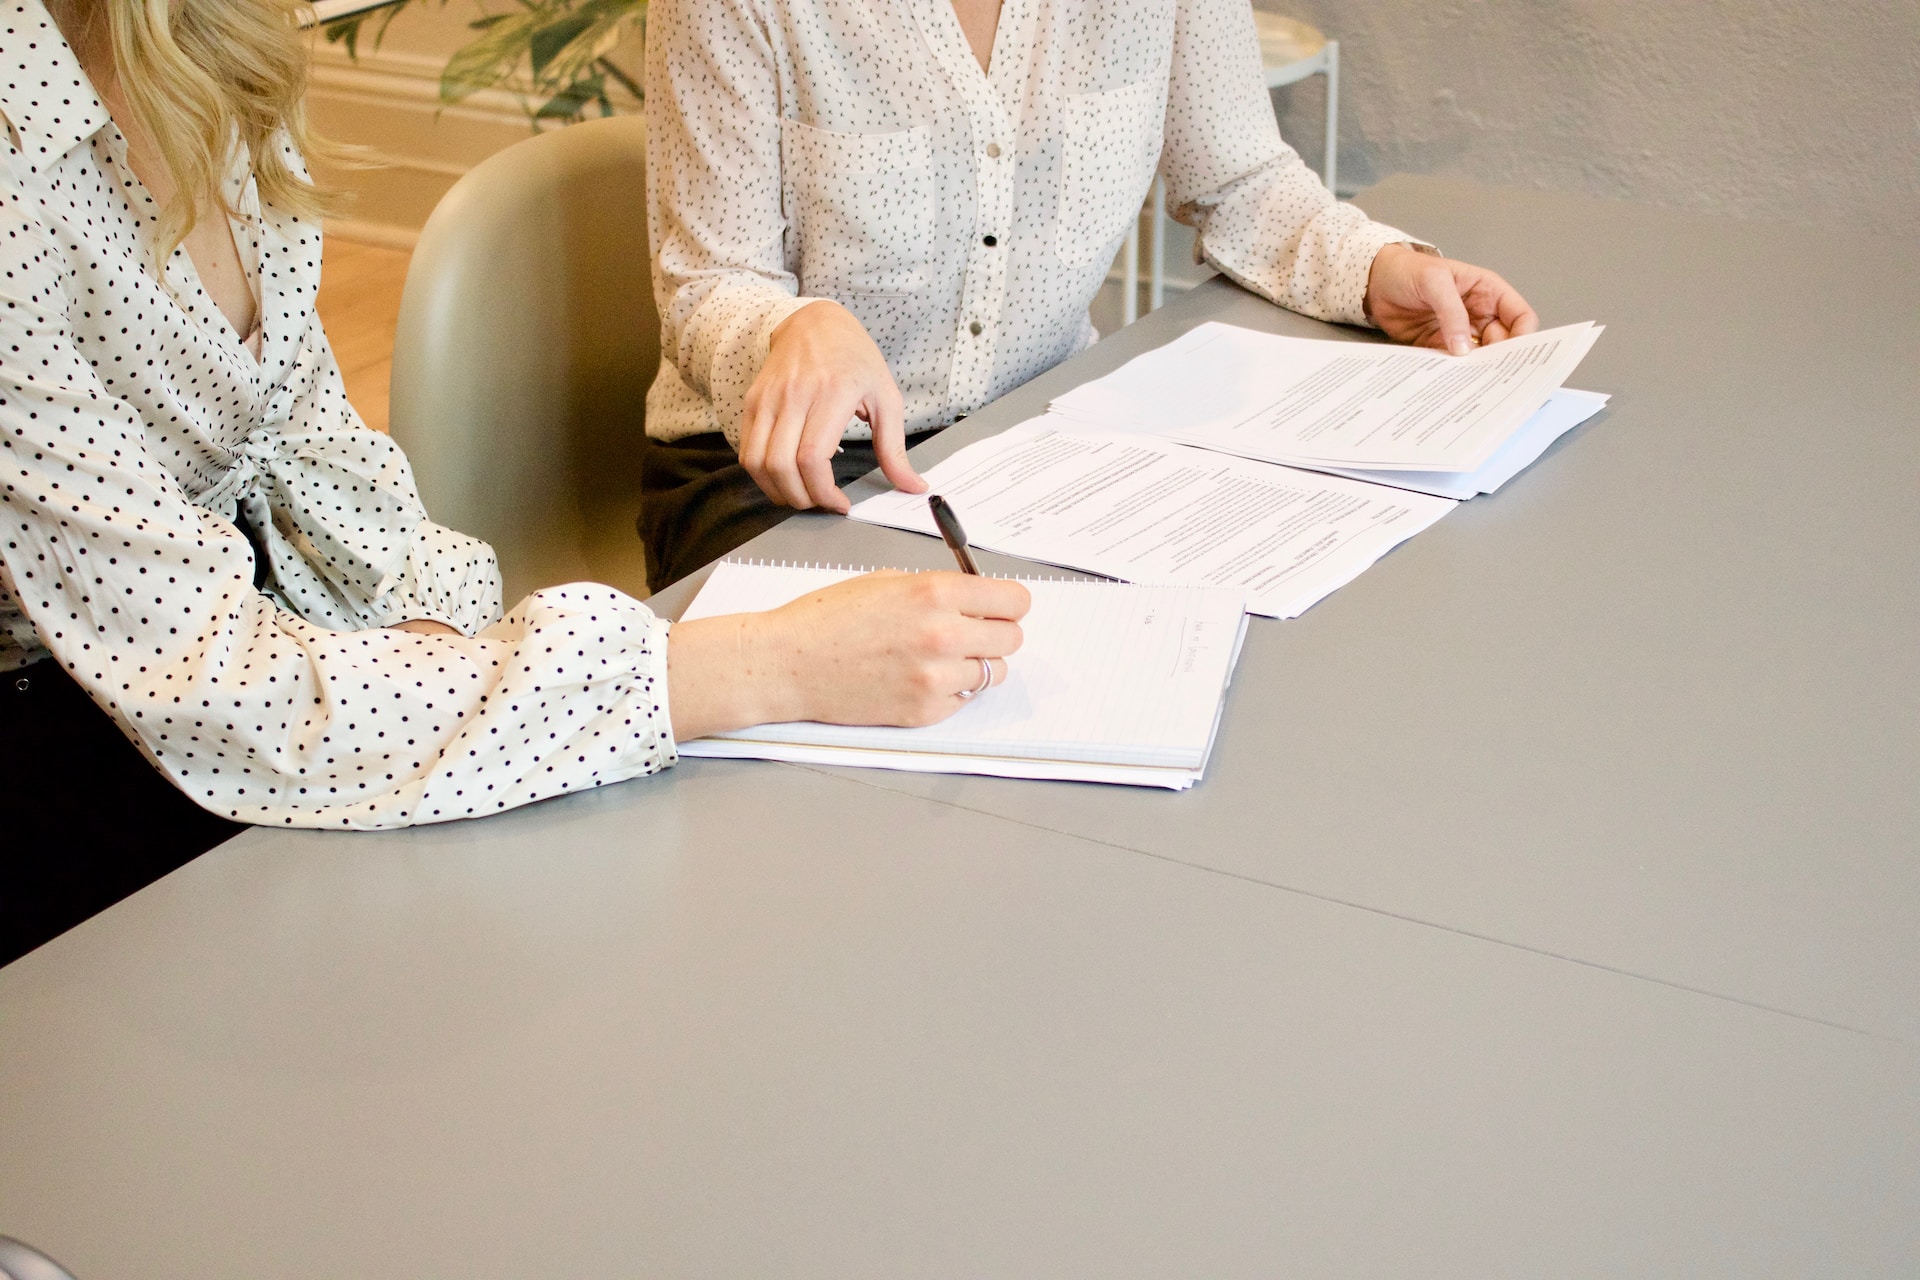 woman signing document representing arbitration agreement